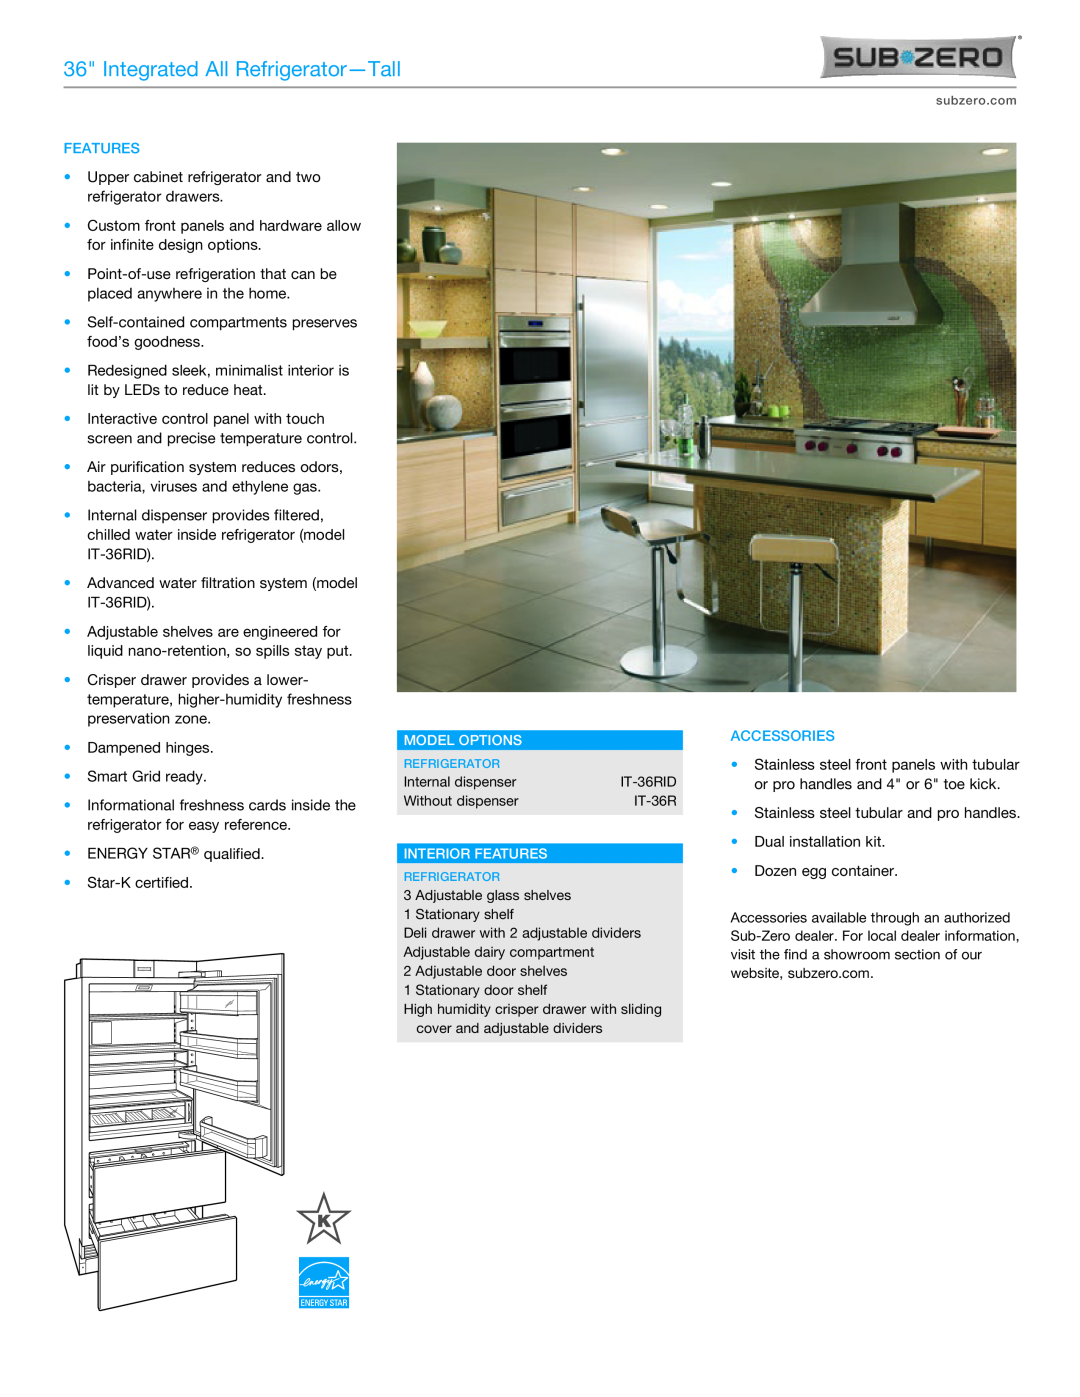 Sub-Zero IT-36RID manual Integrated All Refrigerator-Tall, Model Options, Interior Features, Accessories 